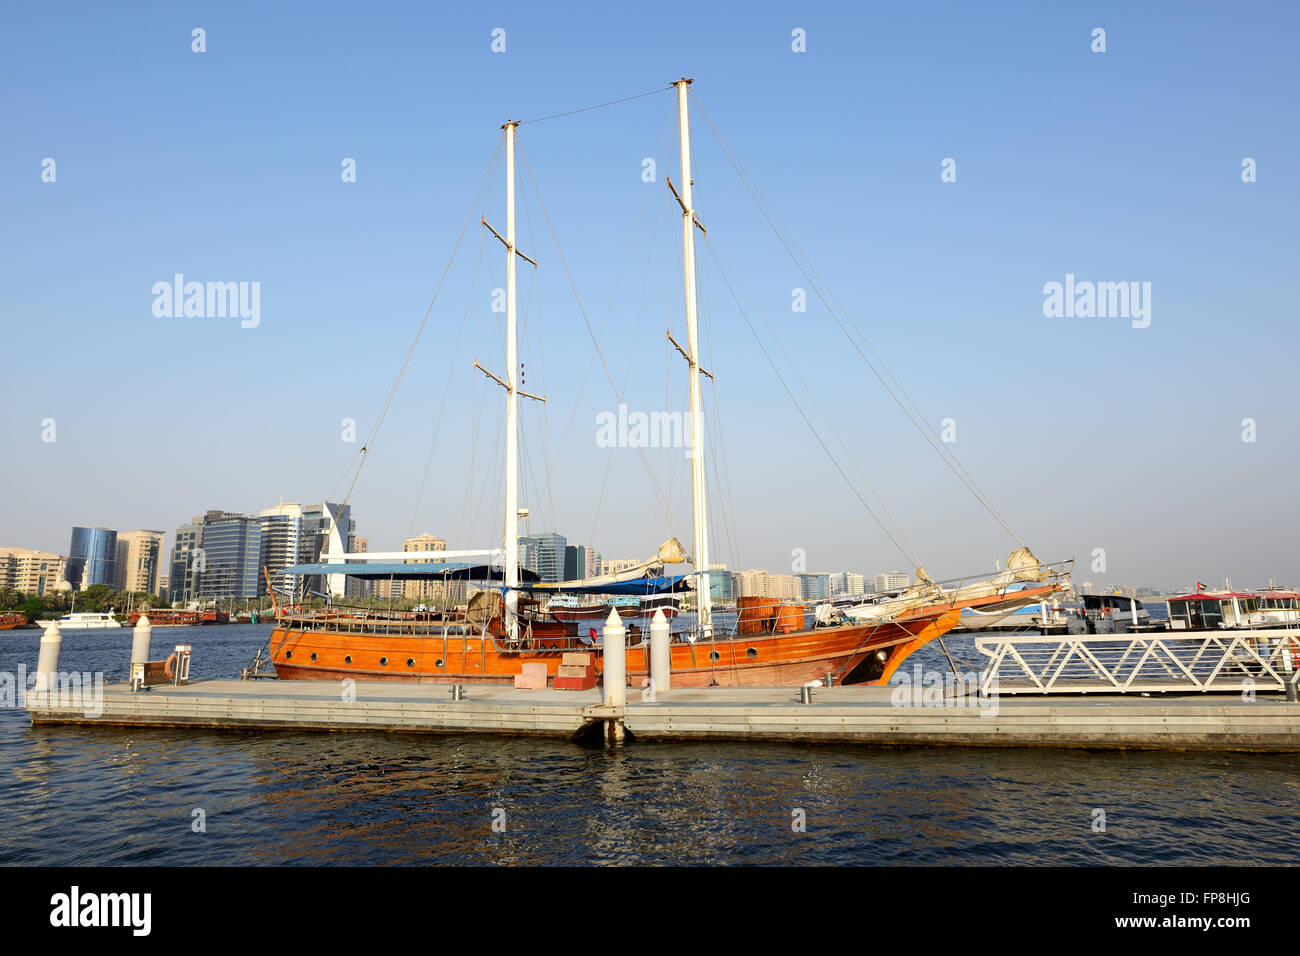 The wooden yacht is in a port of Dubai Creek, United Arab Emirates Stock Photo